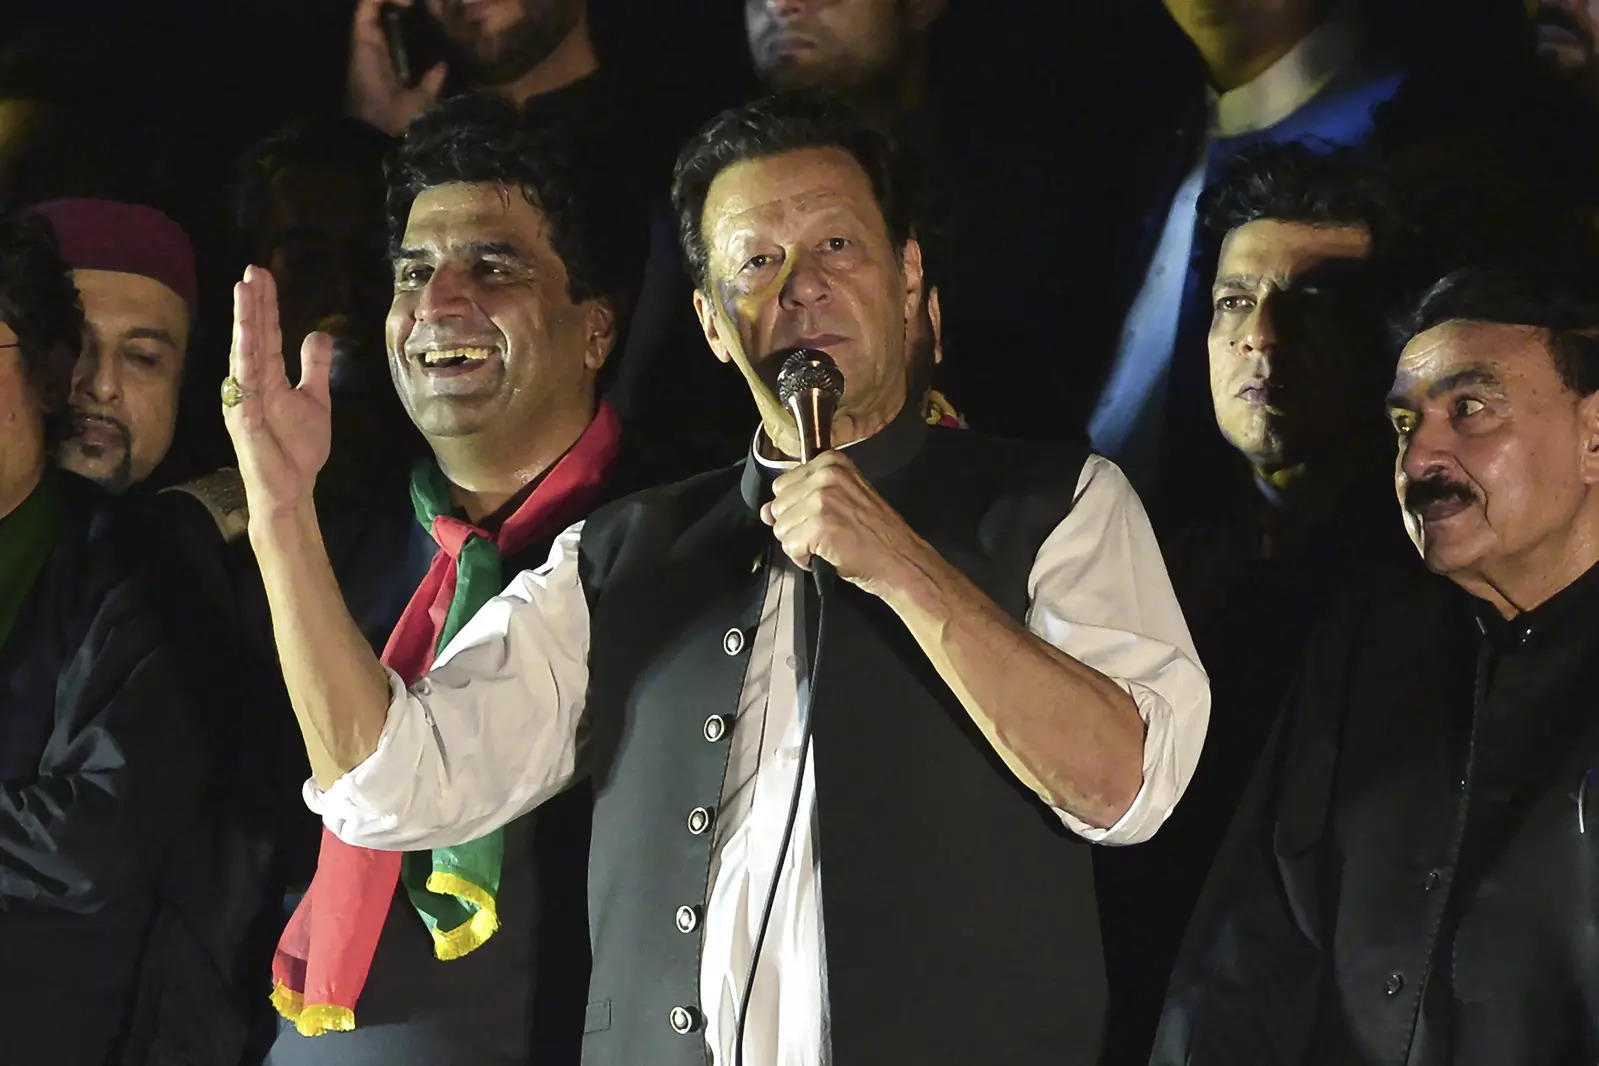 View: Out-of-power Imran Khan a bigger worry for nuclear armed Pakistan and world